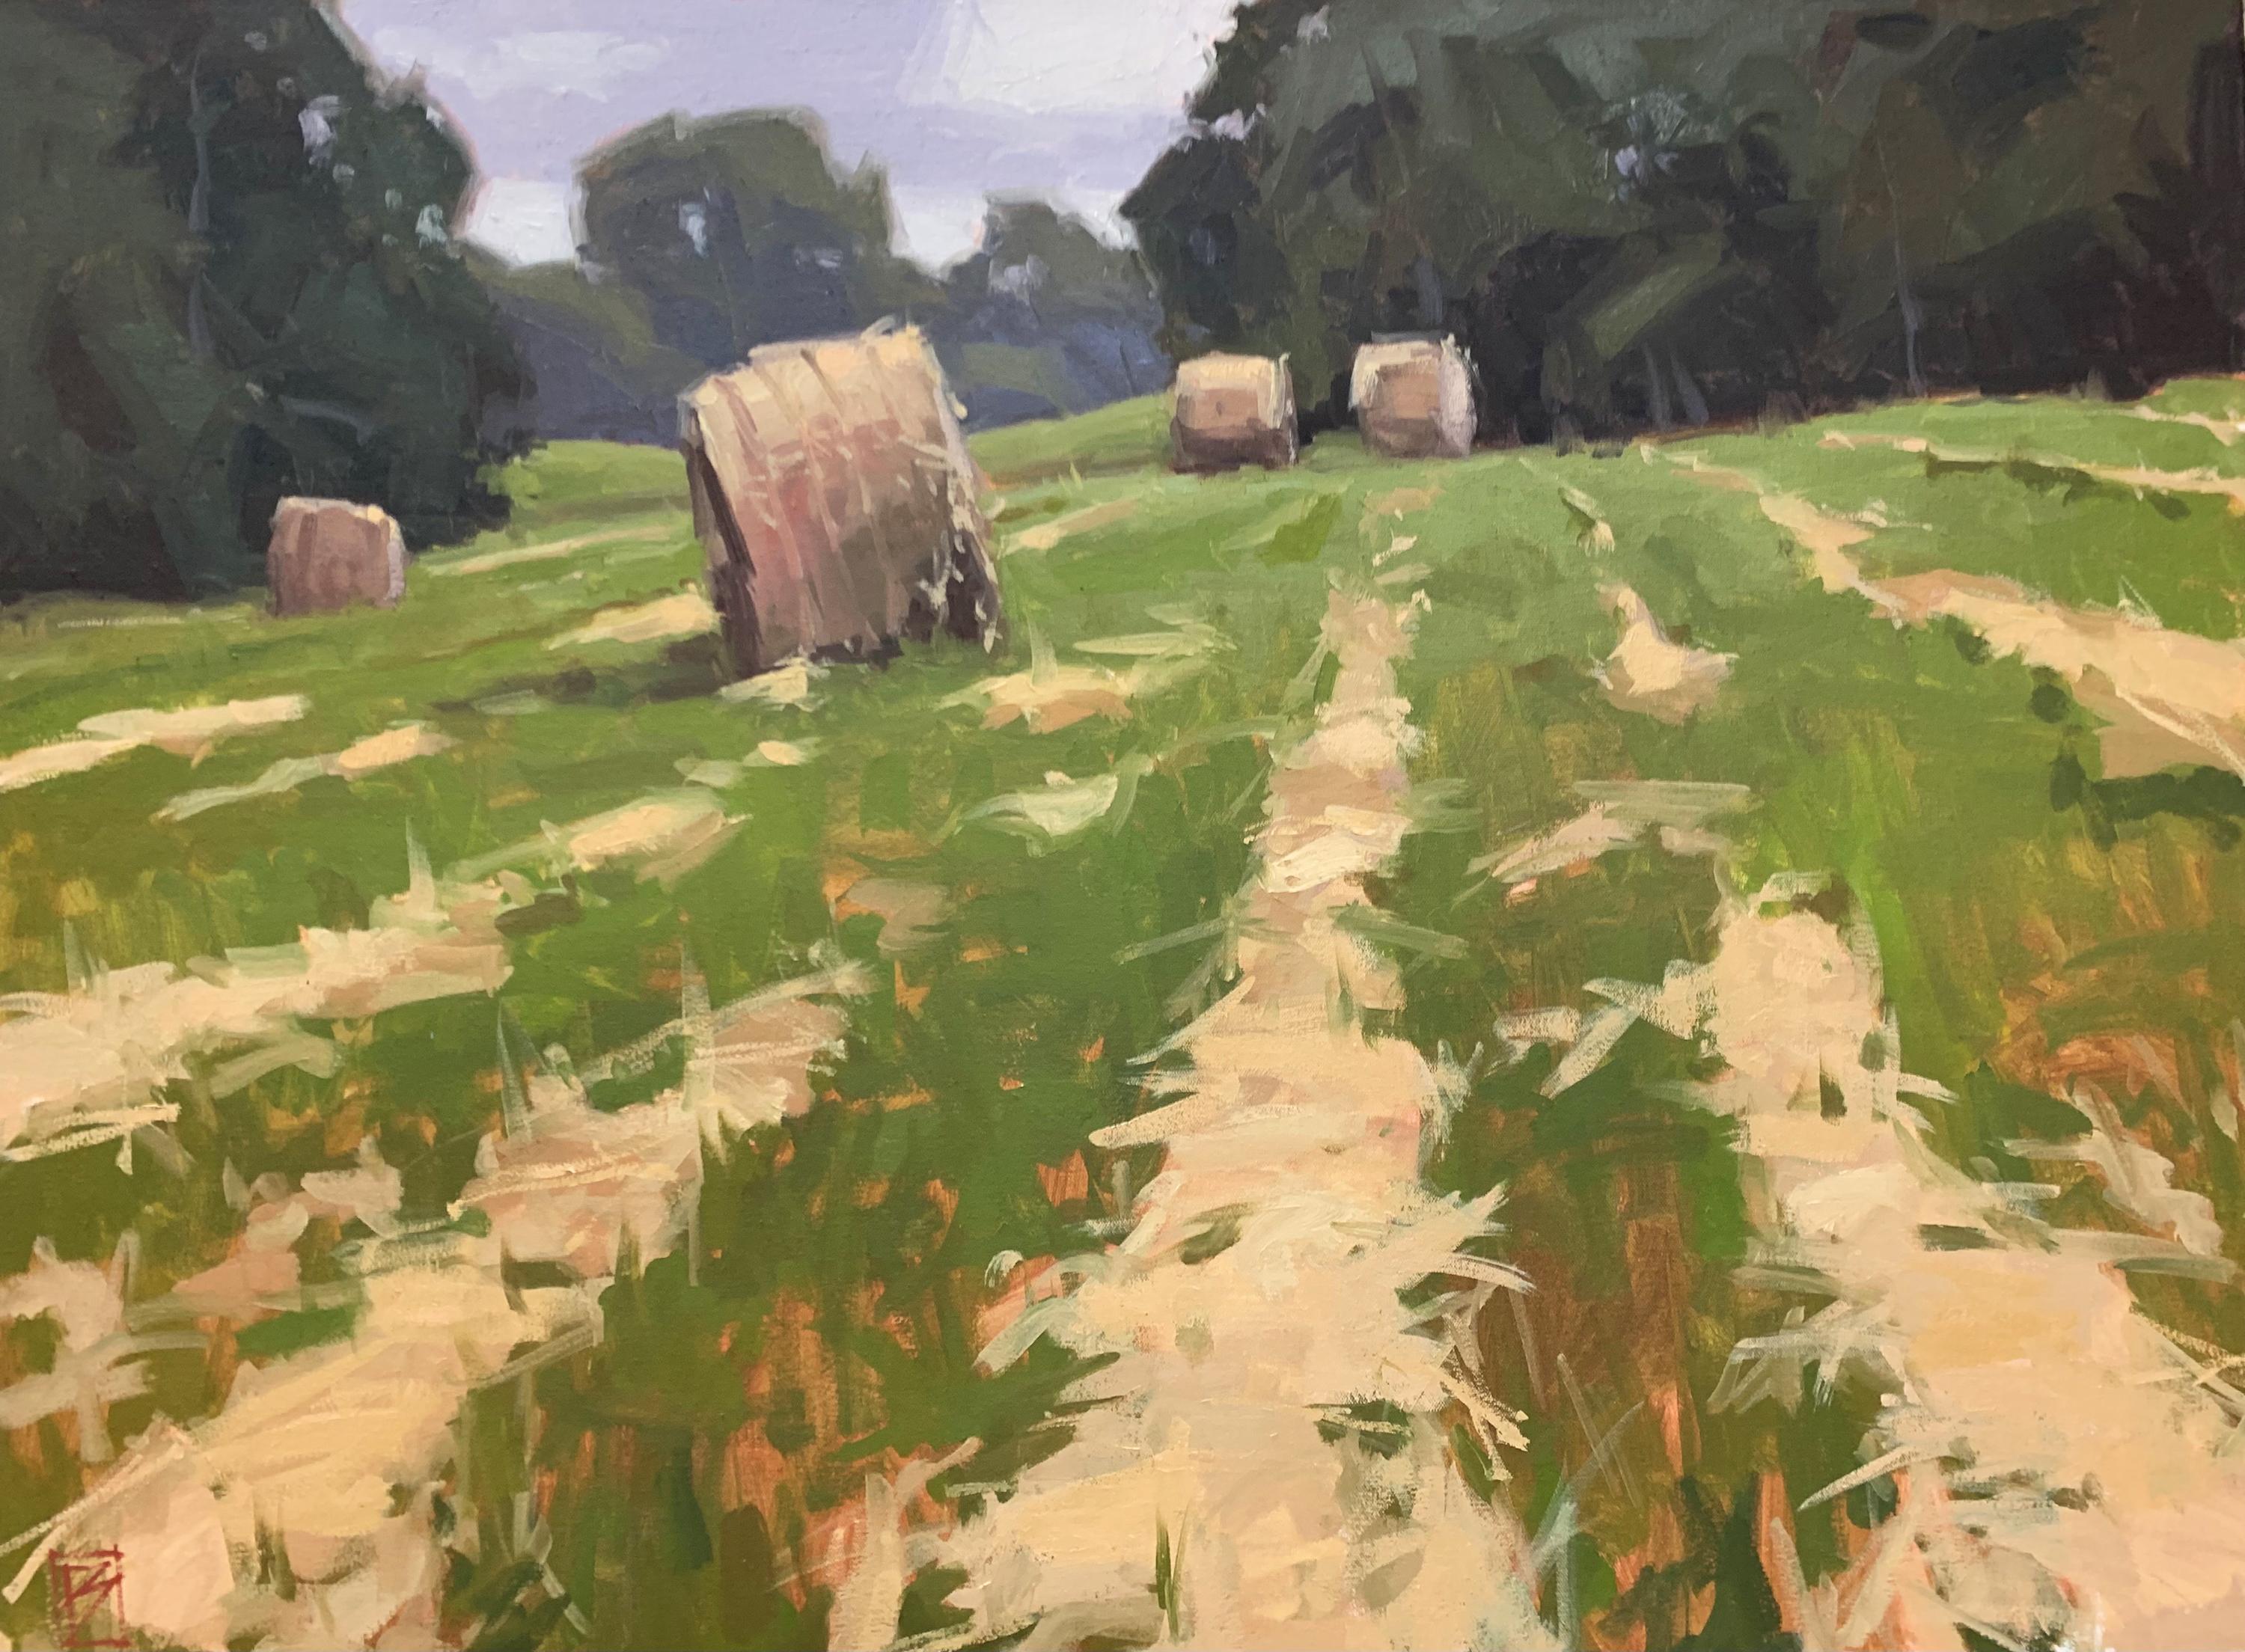 David Boyd Landscape Painting - "Harvest" - hay bales, field, landscape, country painting, impressionism